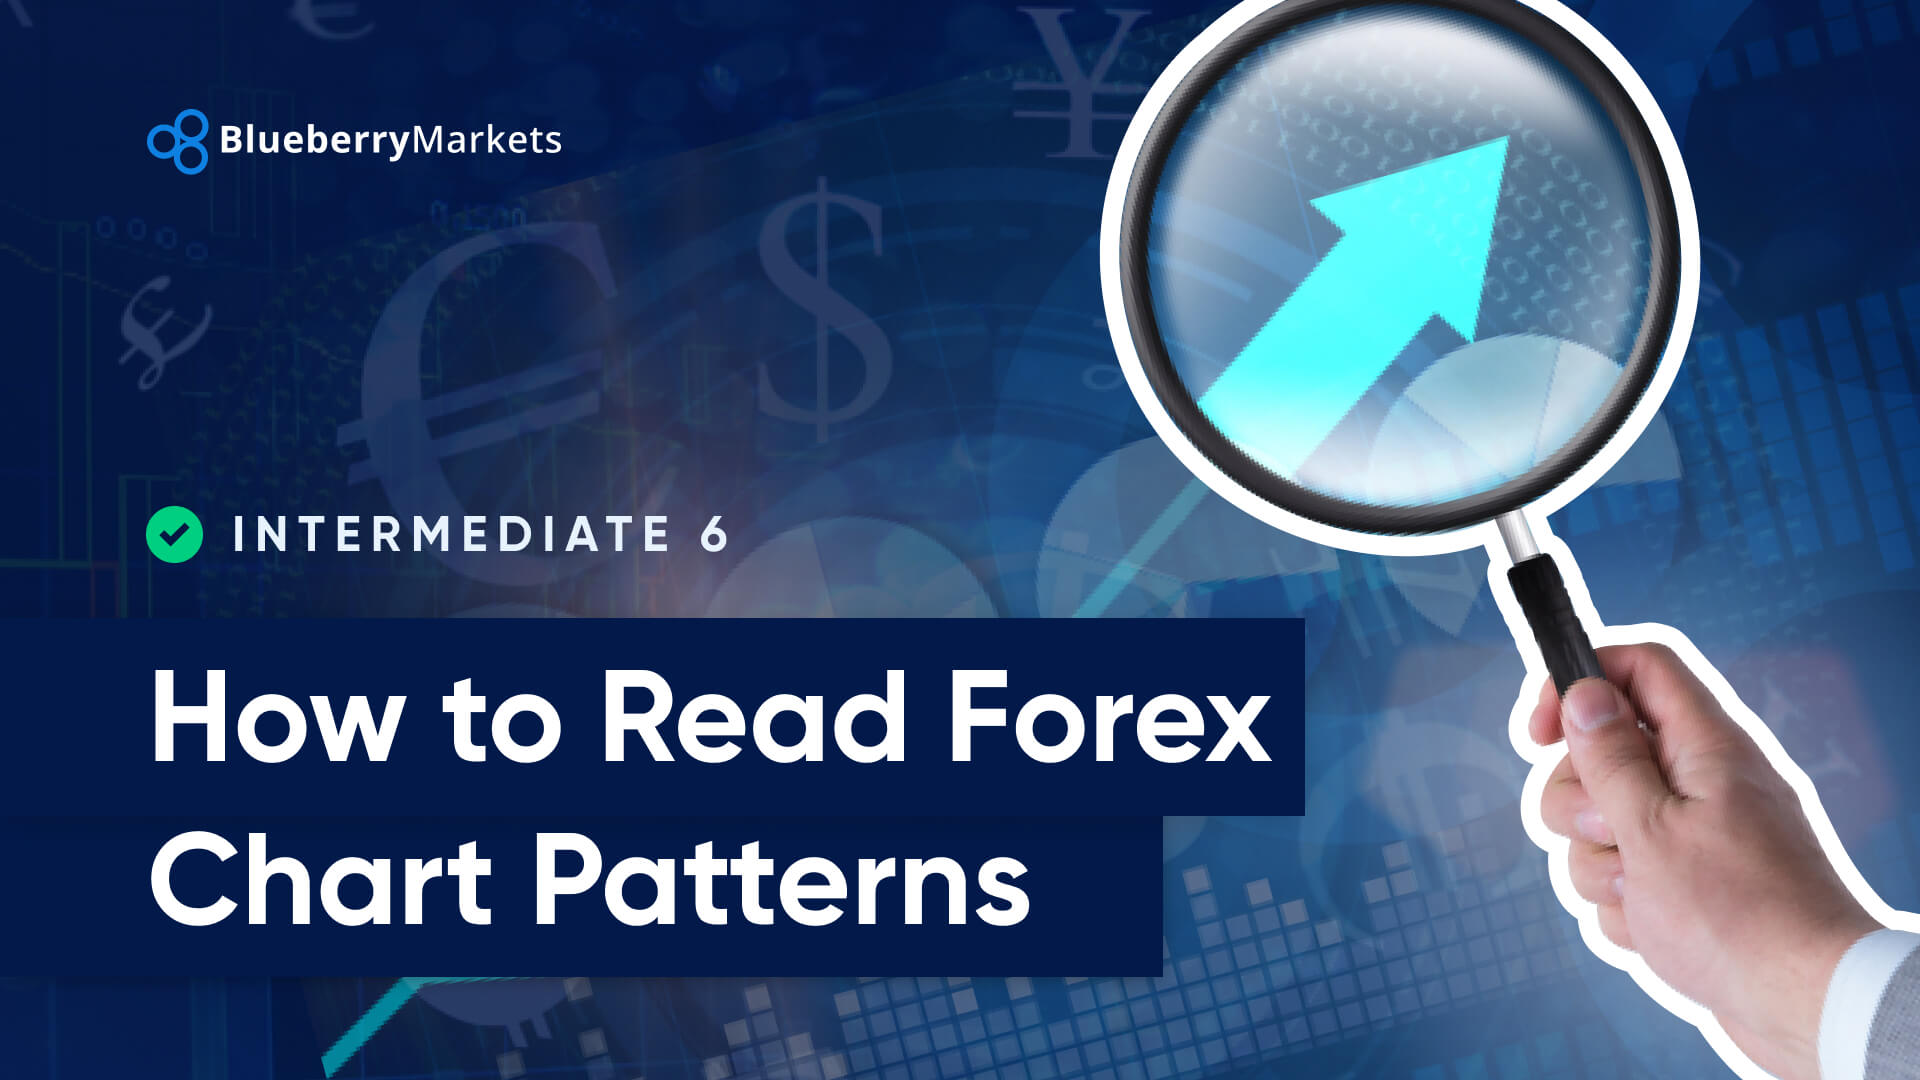 How to Read Forex Chart Patterns